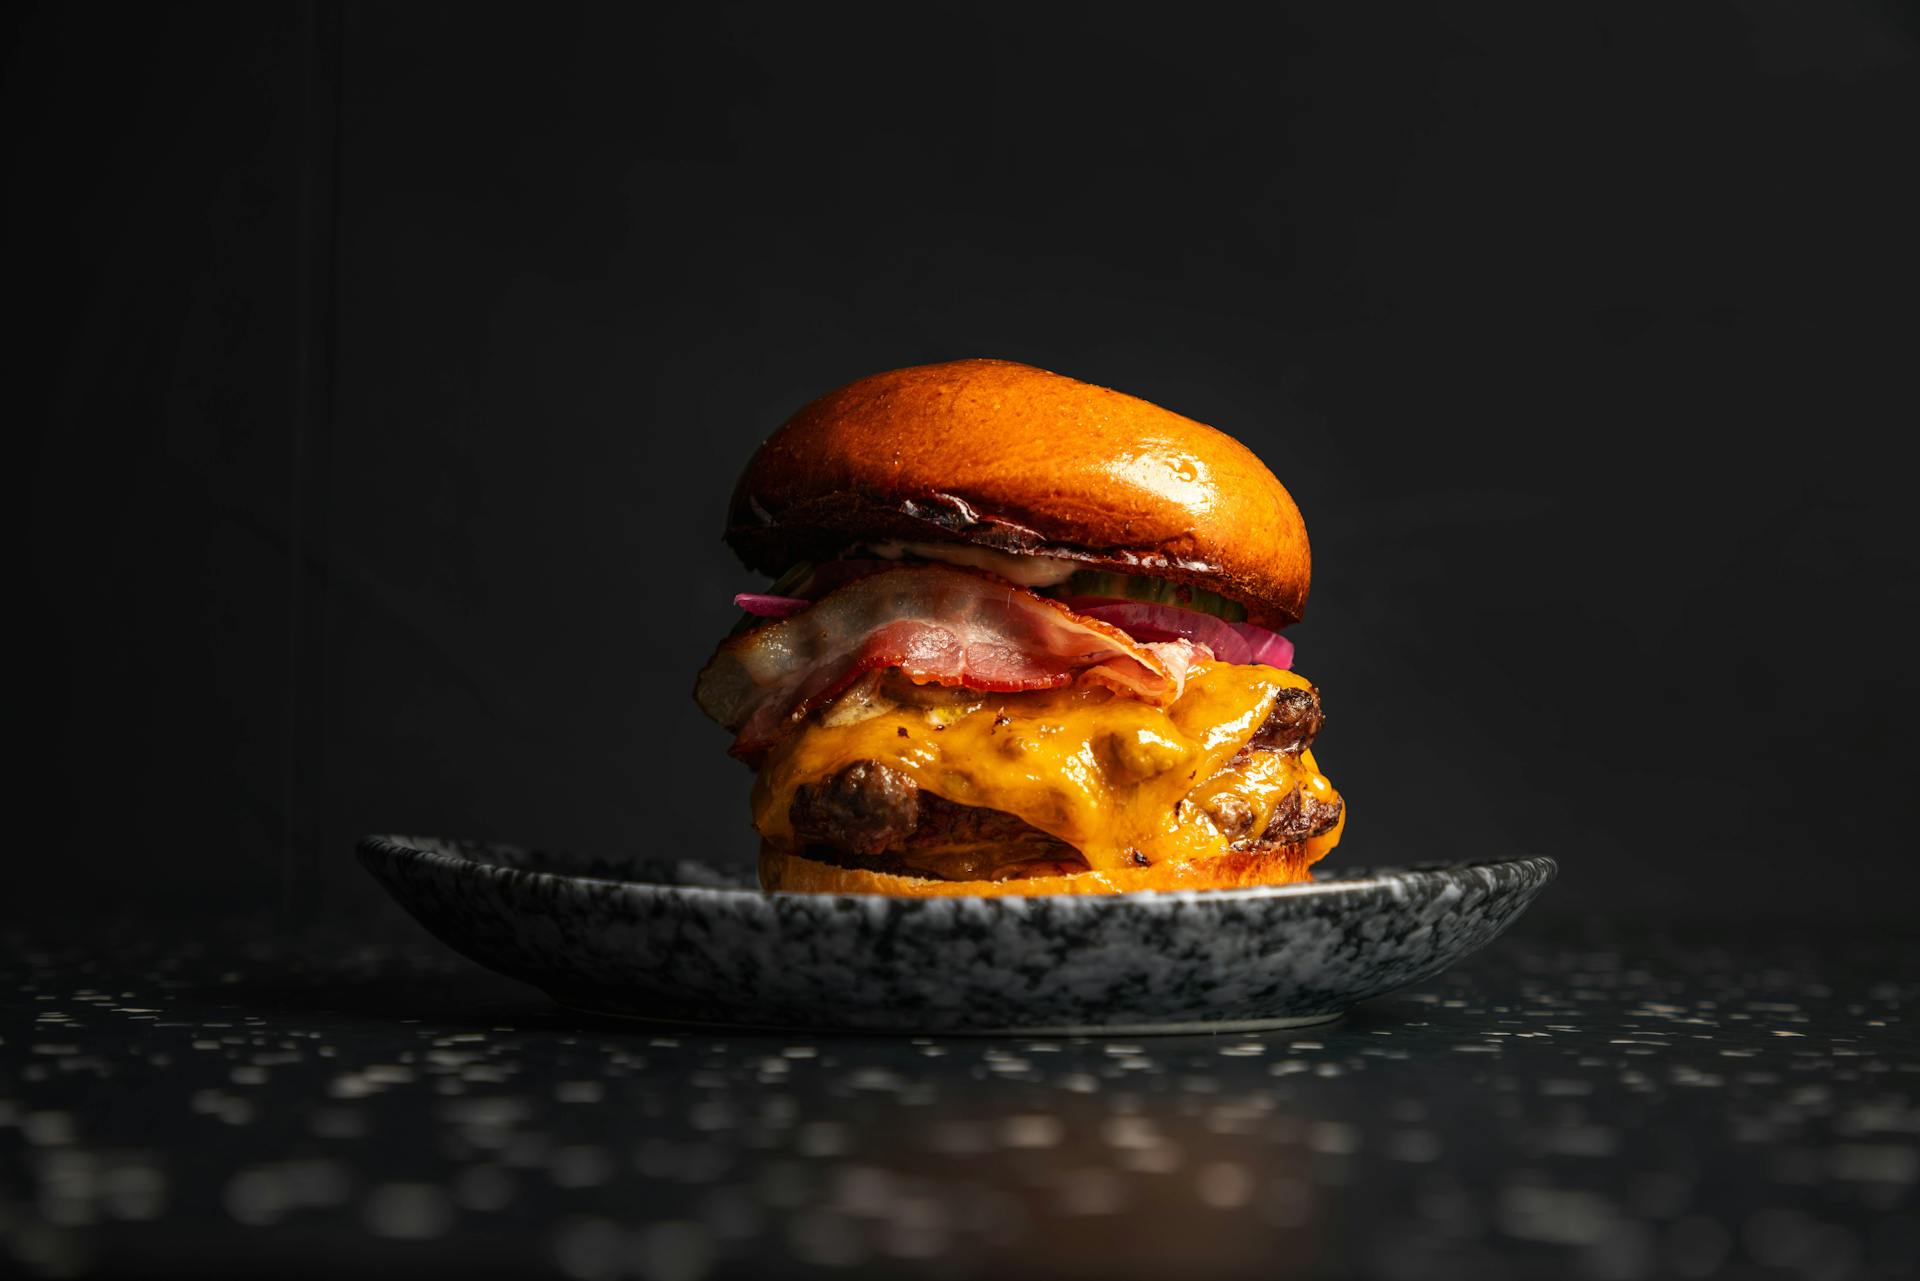 <p>Japanese milk bread, A5 Wagyu &amp; Luxembourgish beef patty, bacon,&nbsp; mayonnaise, marinated mushrooms, cheddar cheese</p>